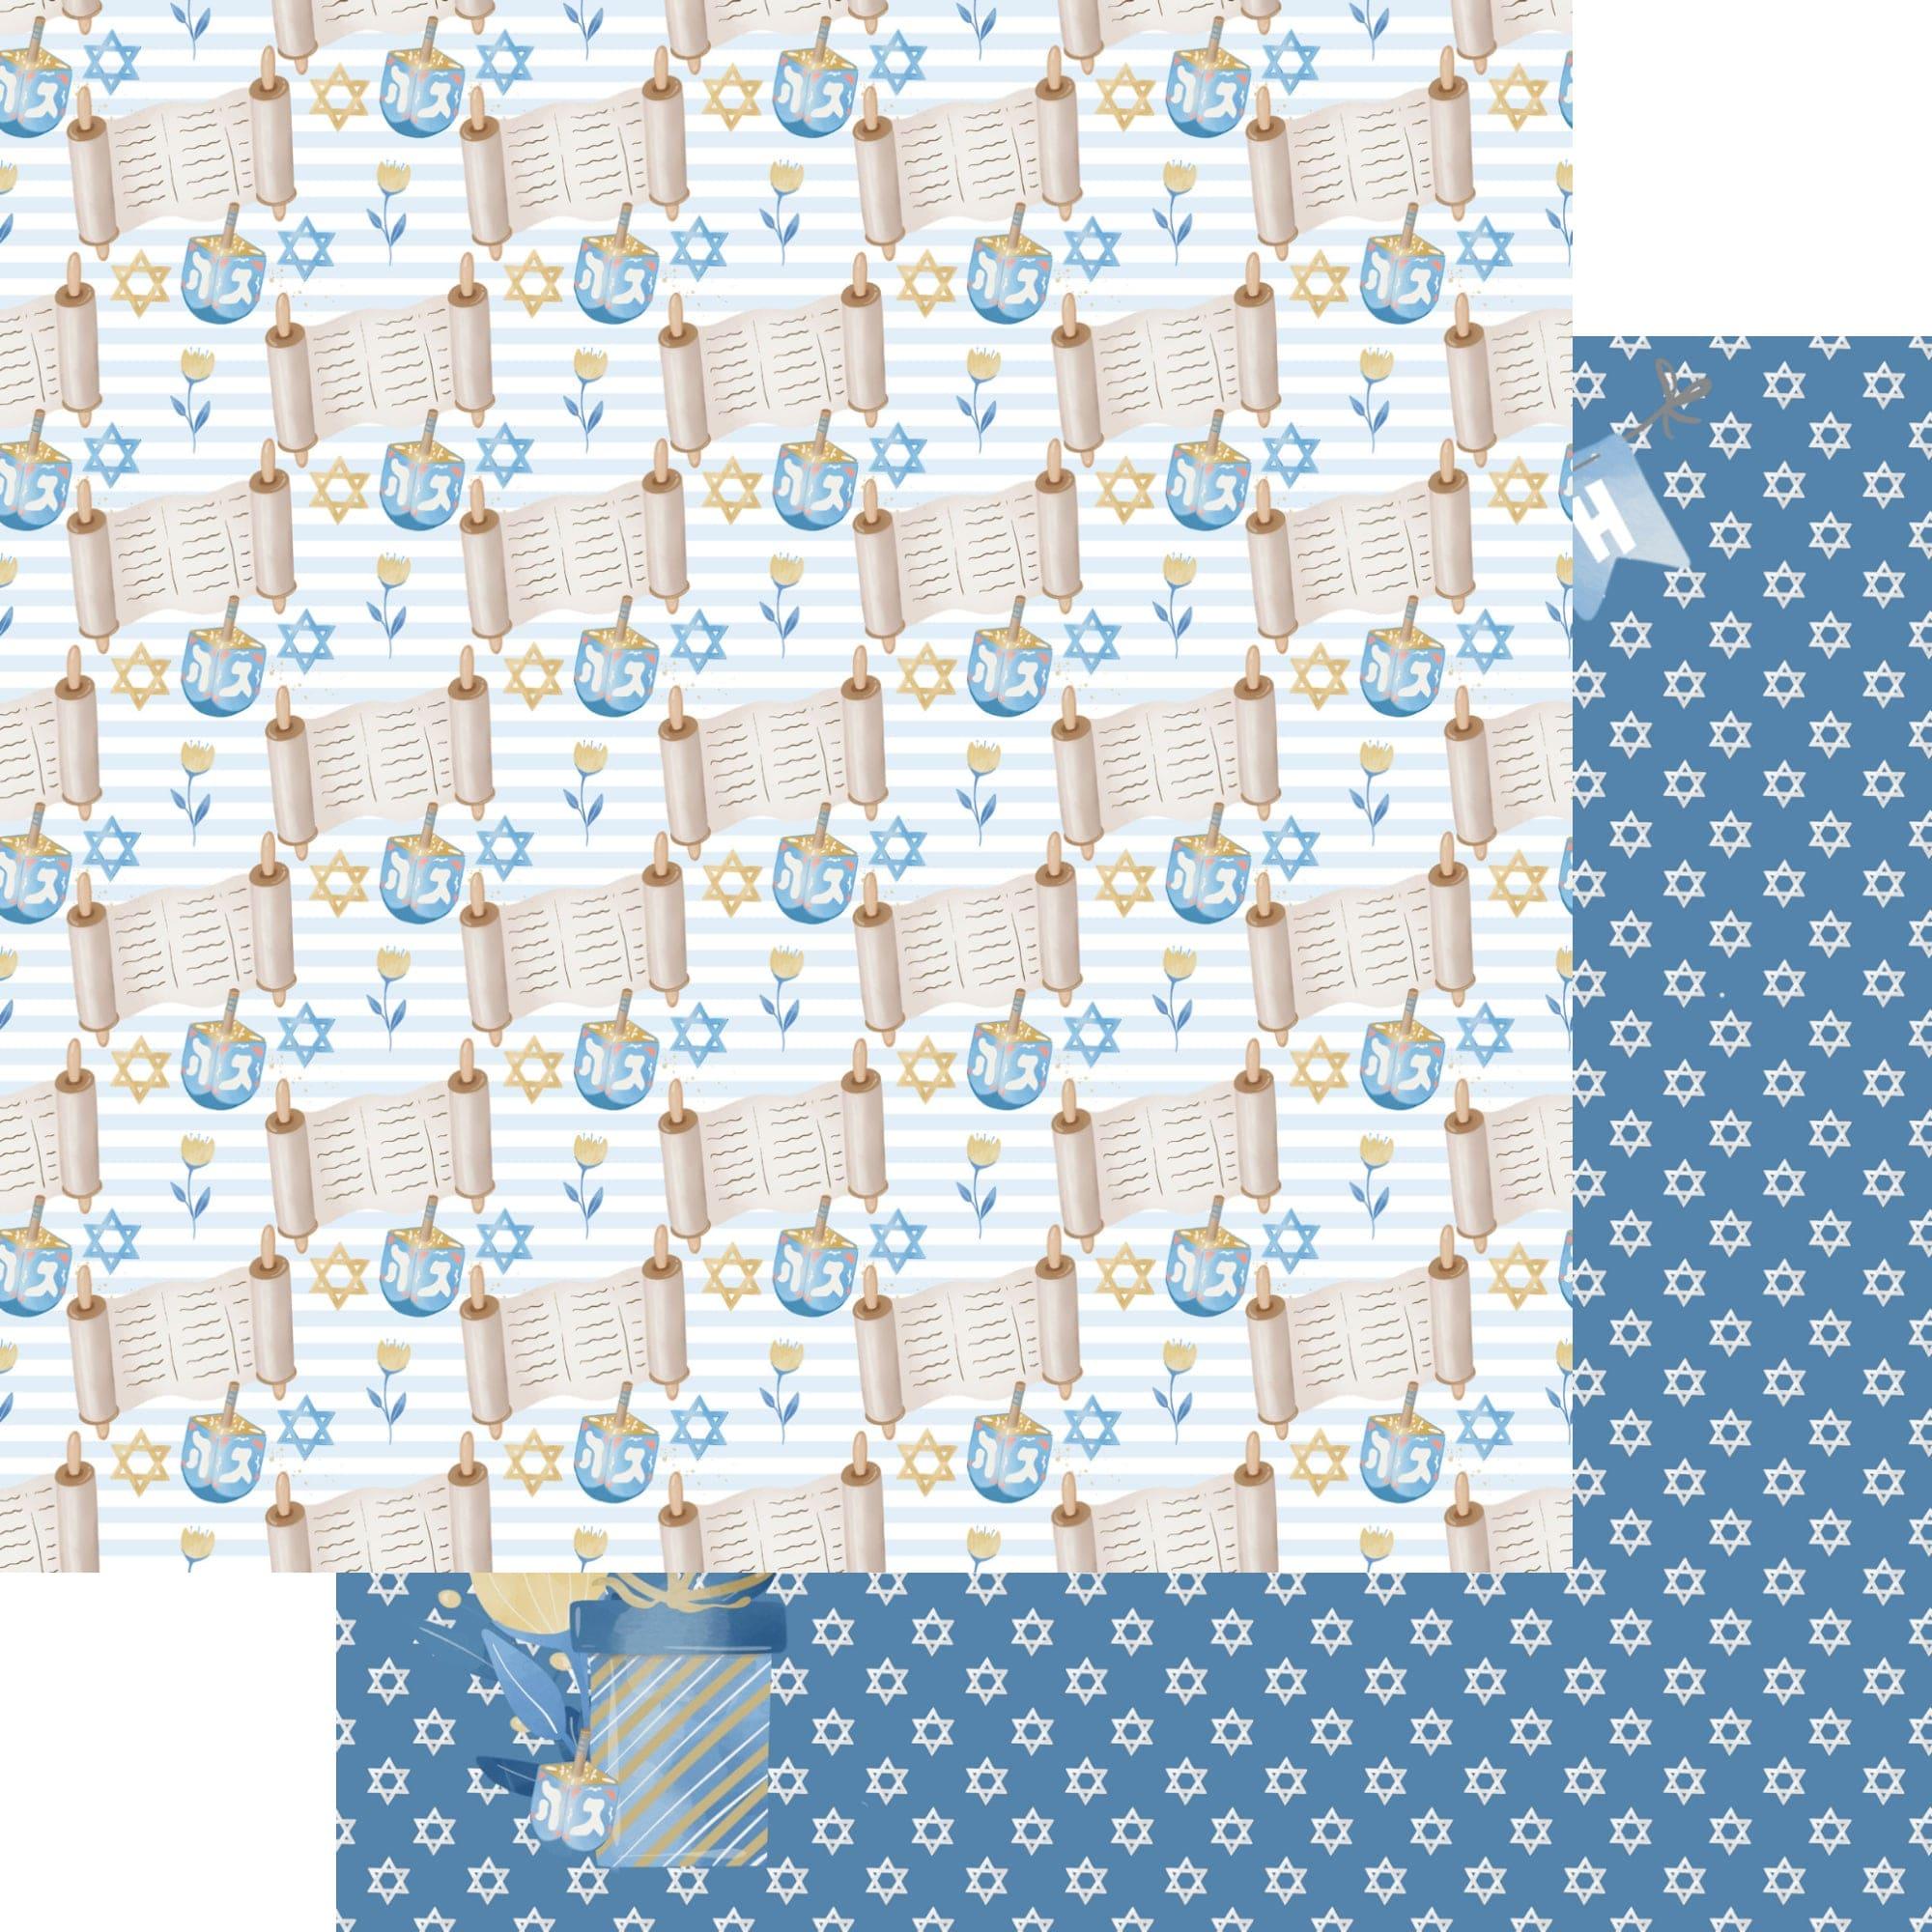 Hanukkah Collection Banner 12 x 12 Double-Sided Scrapbook Paper by SSC Designs - Scrapbook Supply Companies